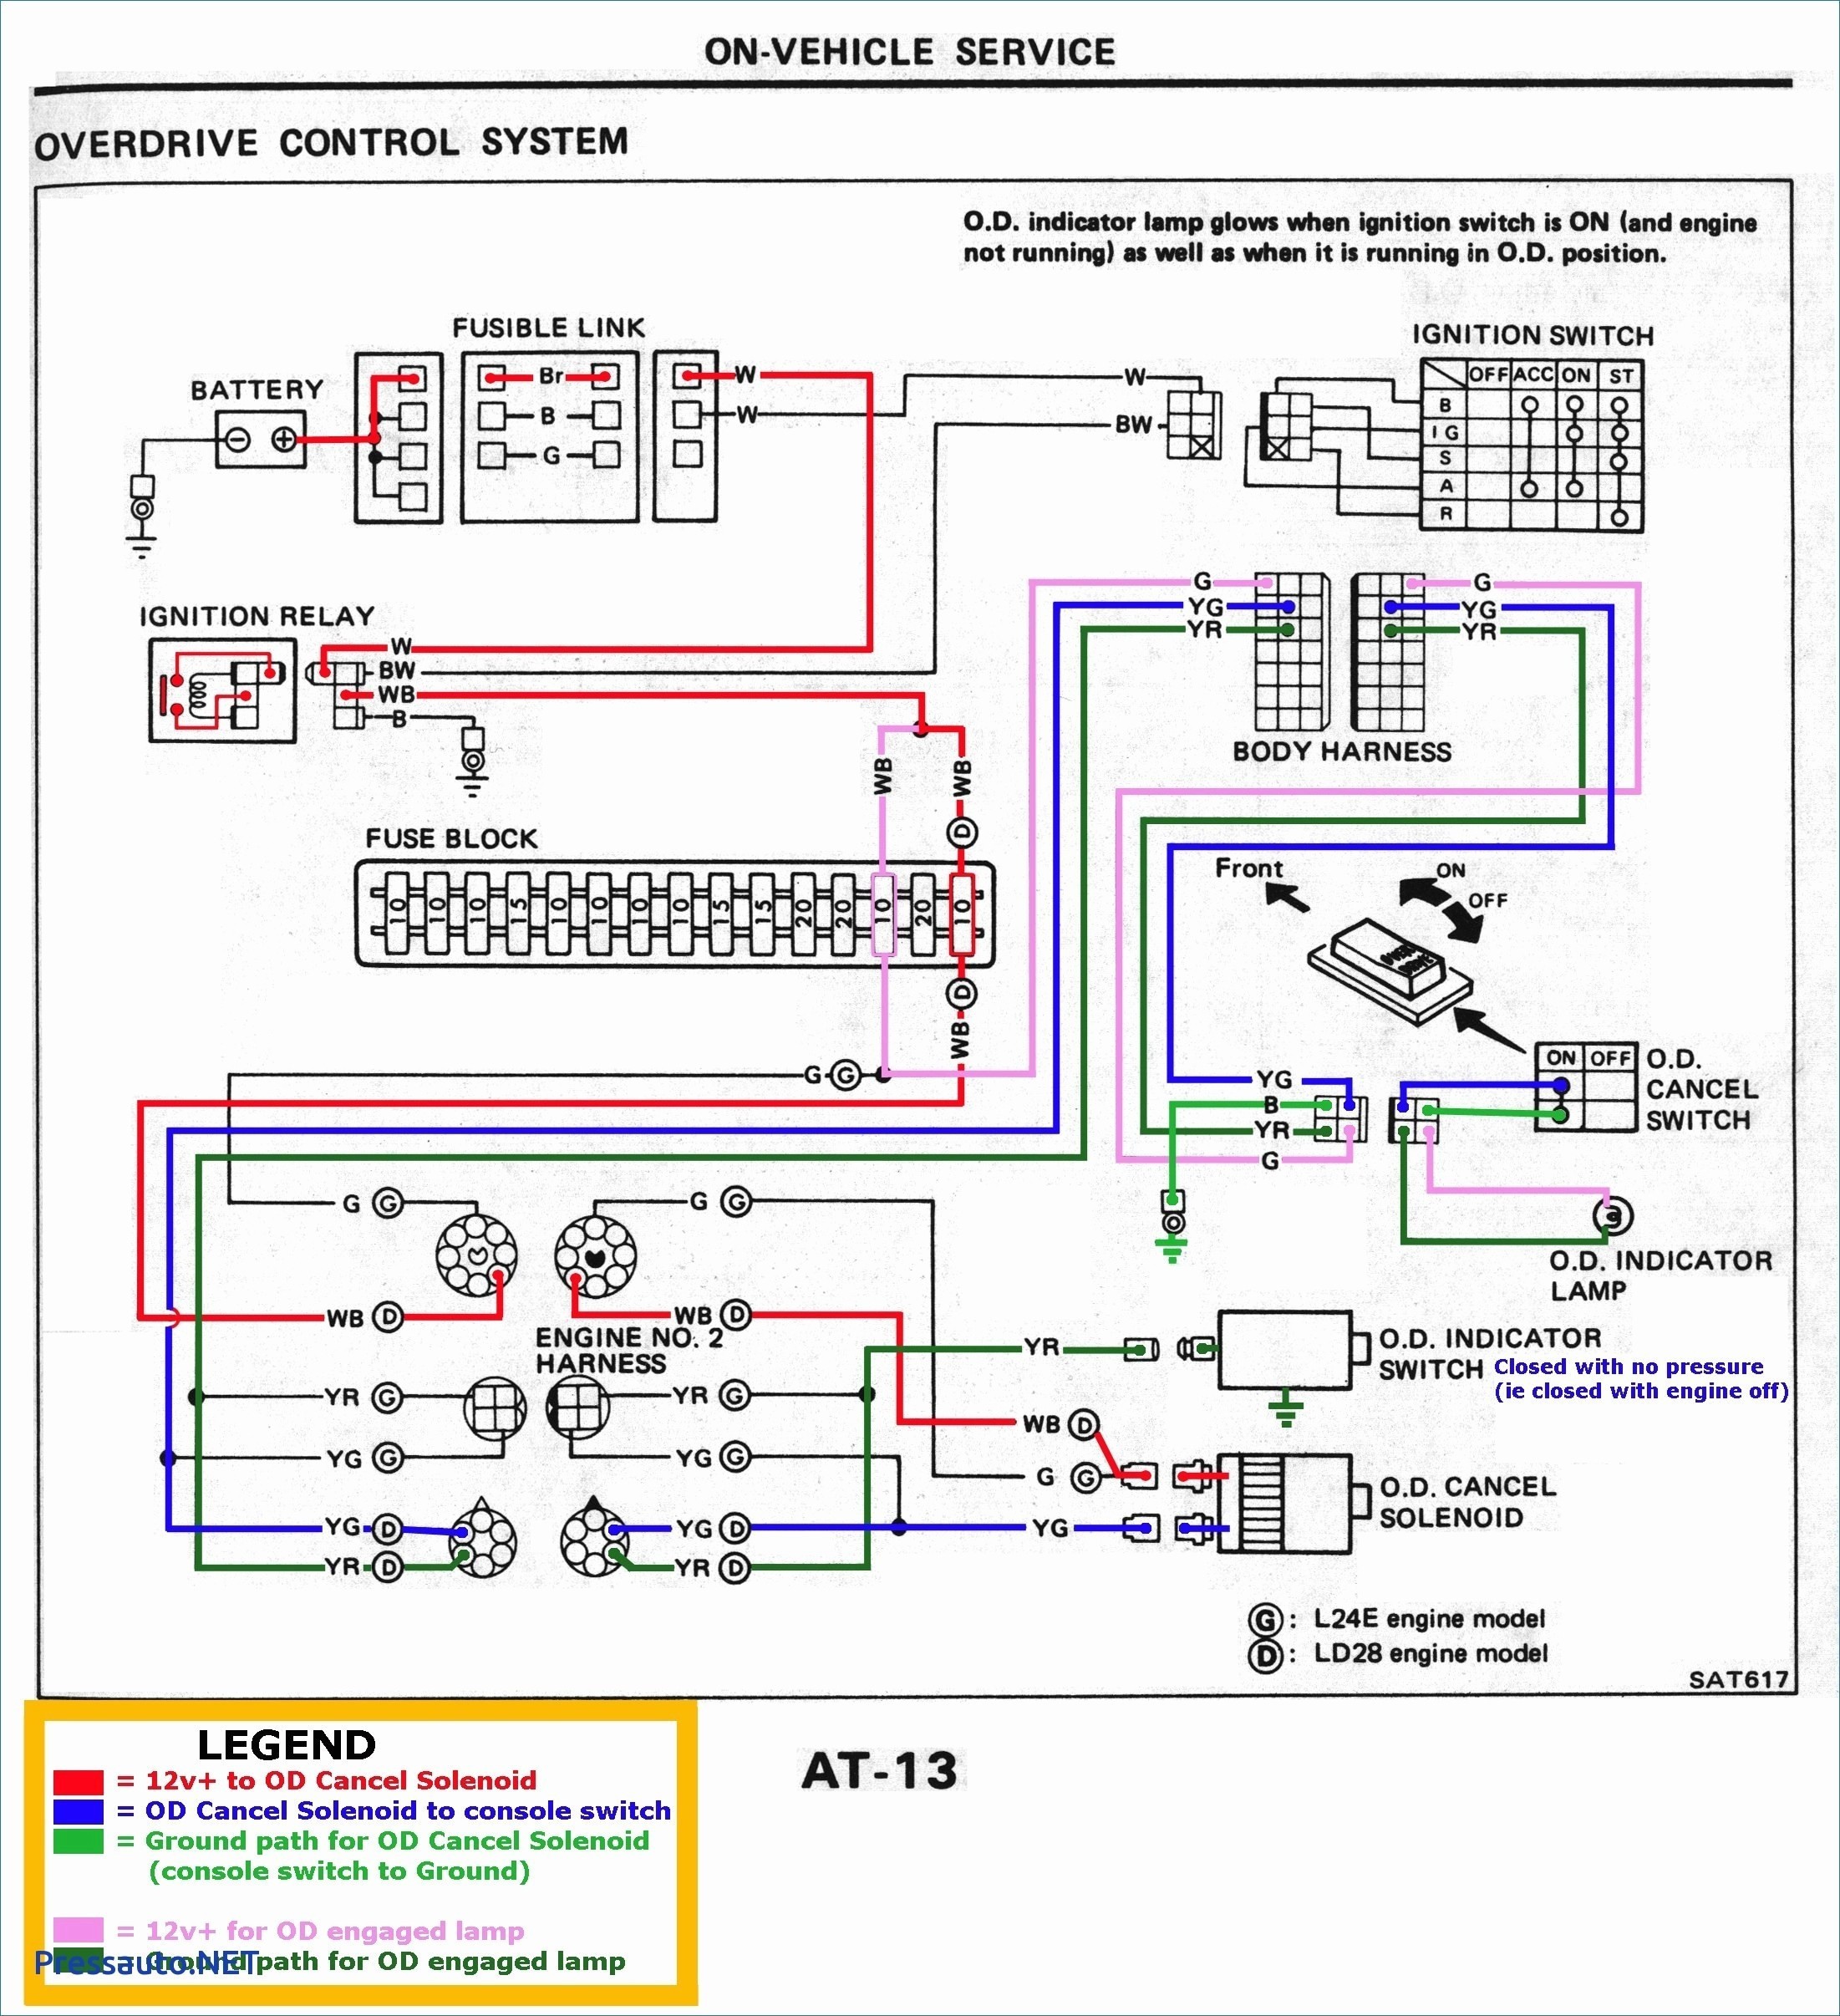 Wiring Diagram for A Honeywell thermostat Honeywell thermostat Wiring Diagram Best 5 0 Honeywell Rth111 Of Wiring Diagram for A Honeywell thermostat